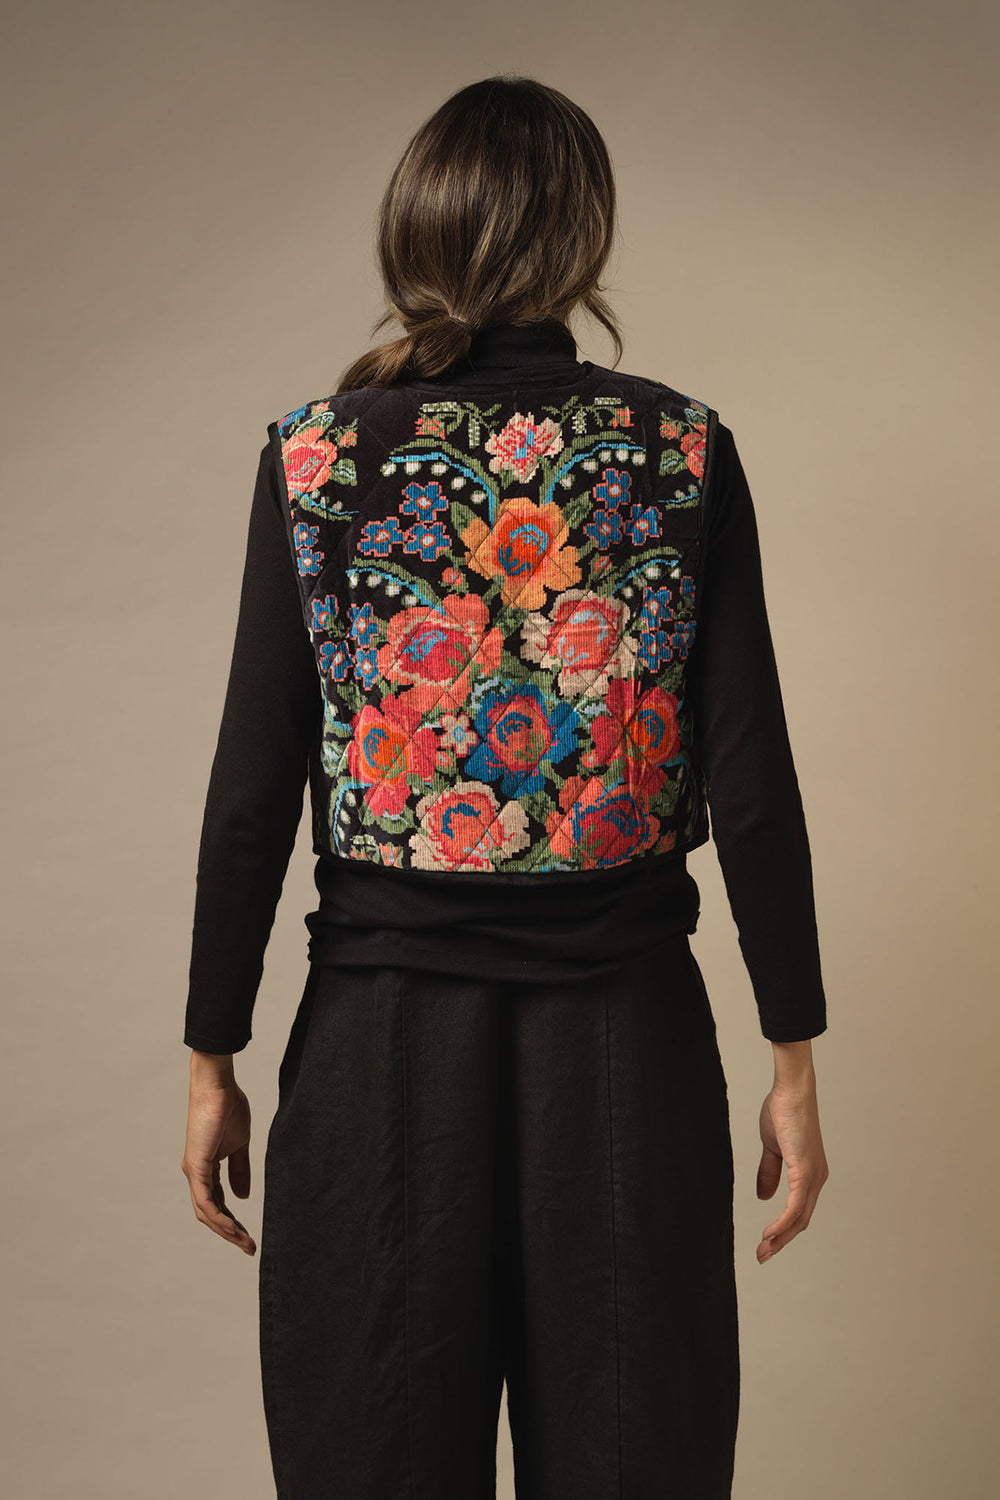 ladies velvet luxury gilet in woven flower print featuring colourful flowers on a black background by One Hundred Stars